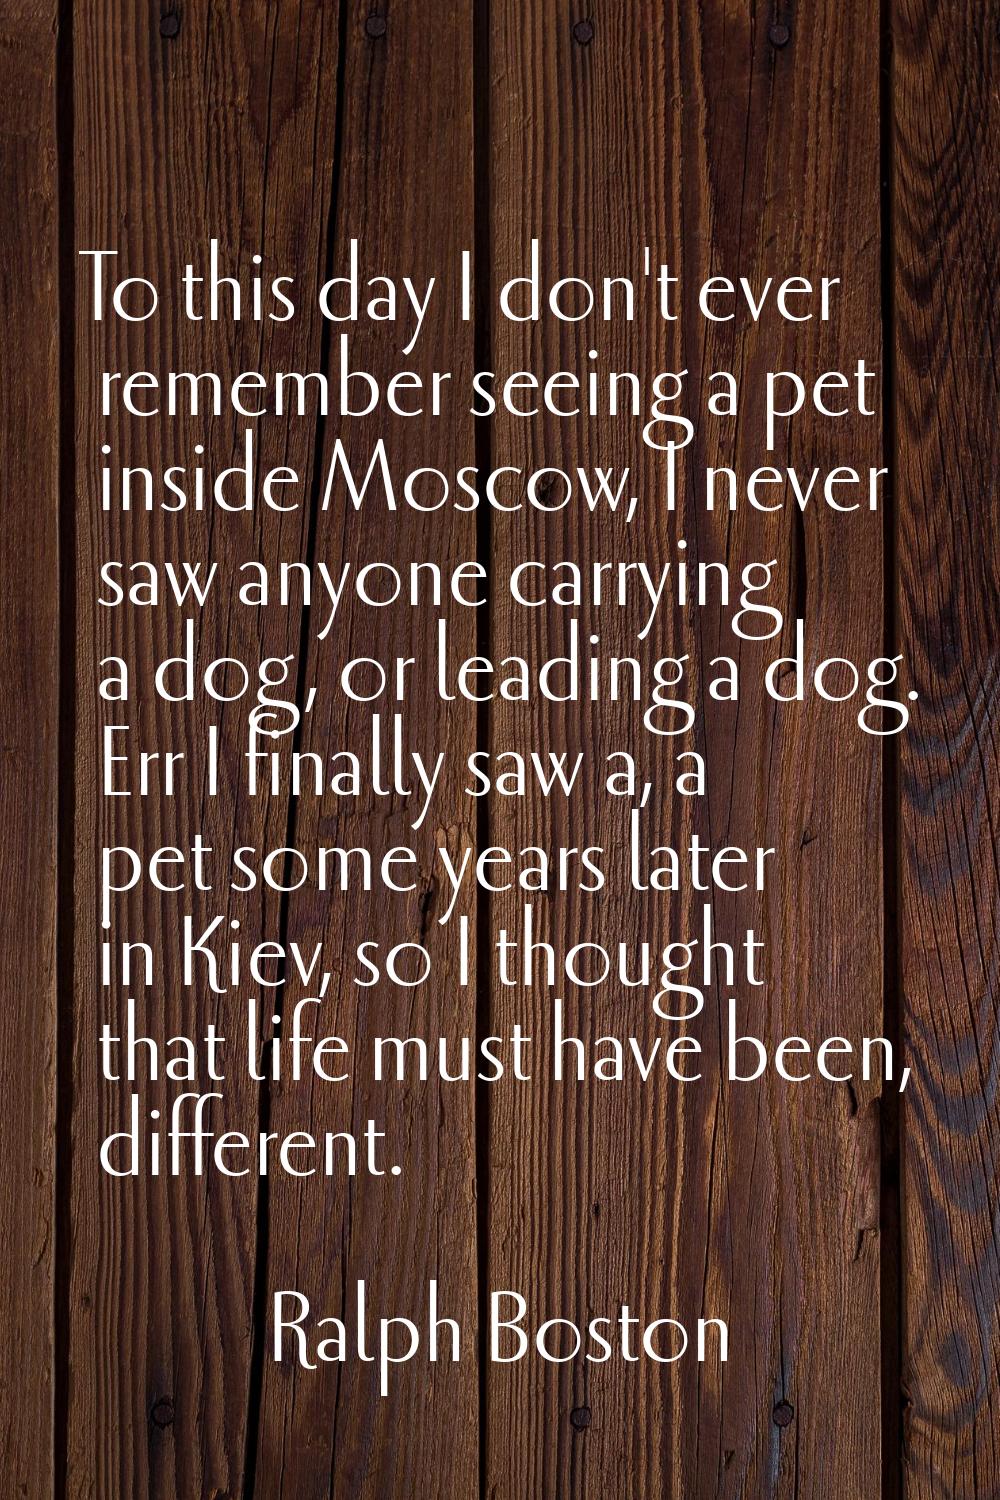 To this day I don't ever remember seeing a pet inside Moscow, I never saw anyone carrying a dog, or